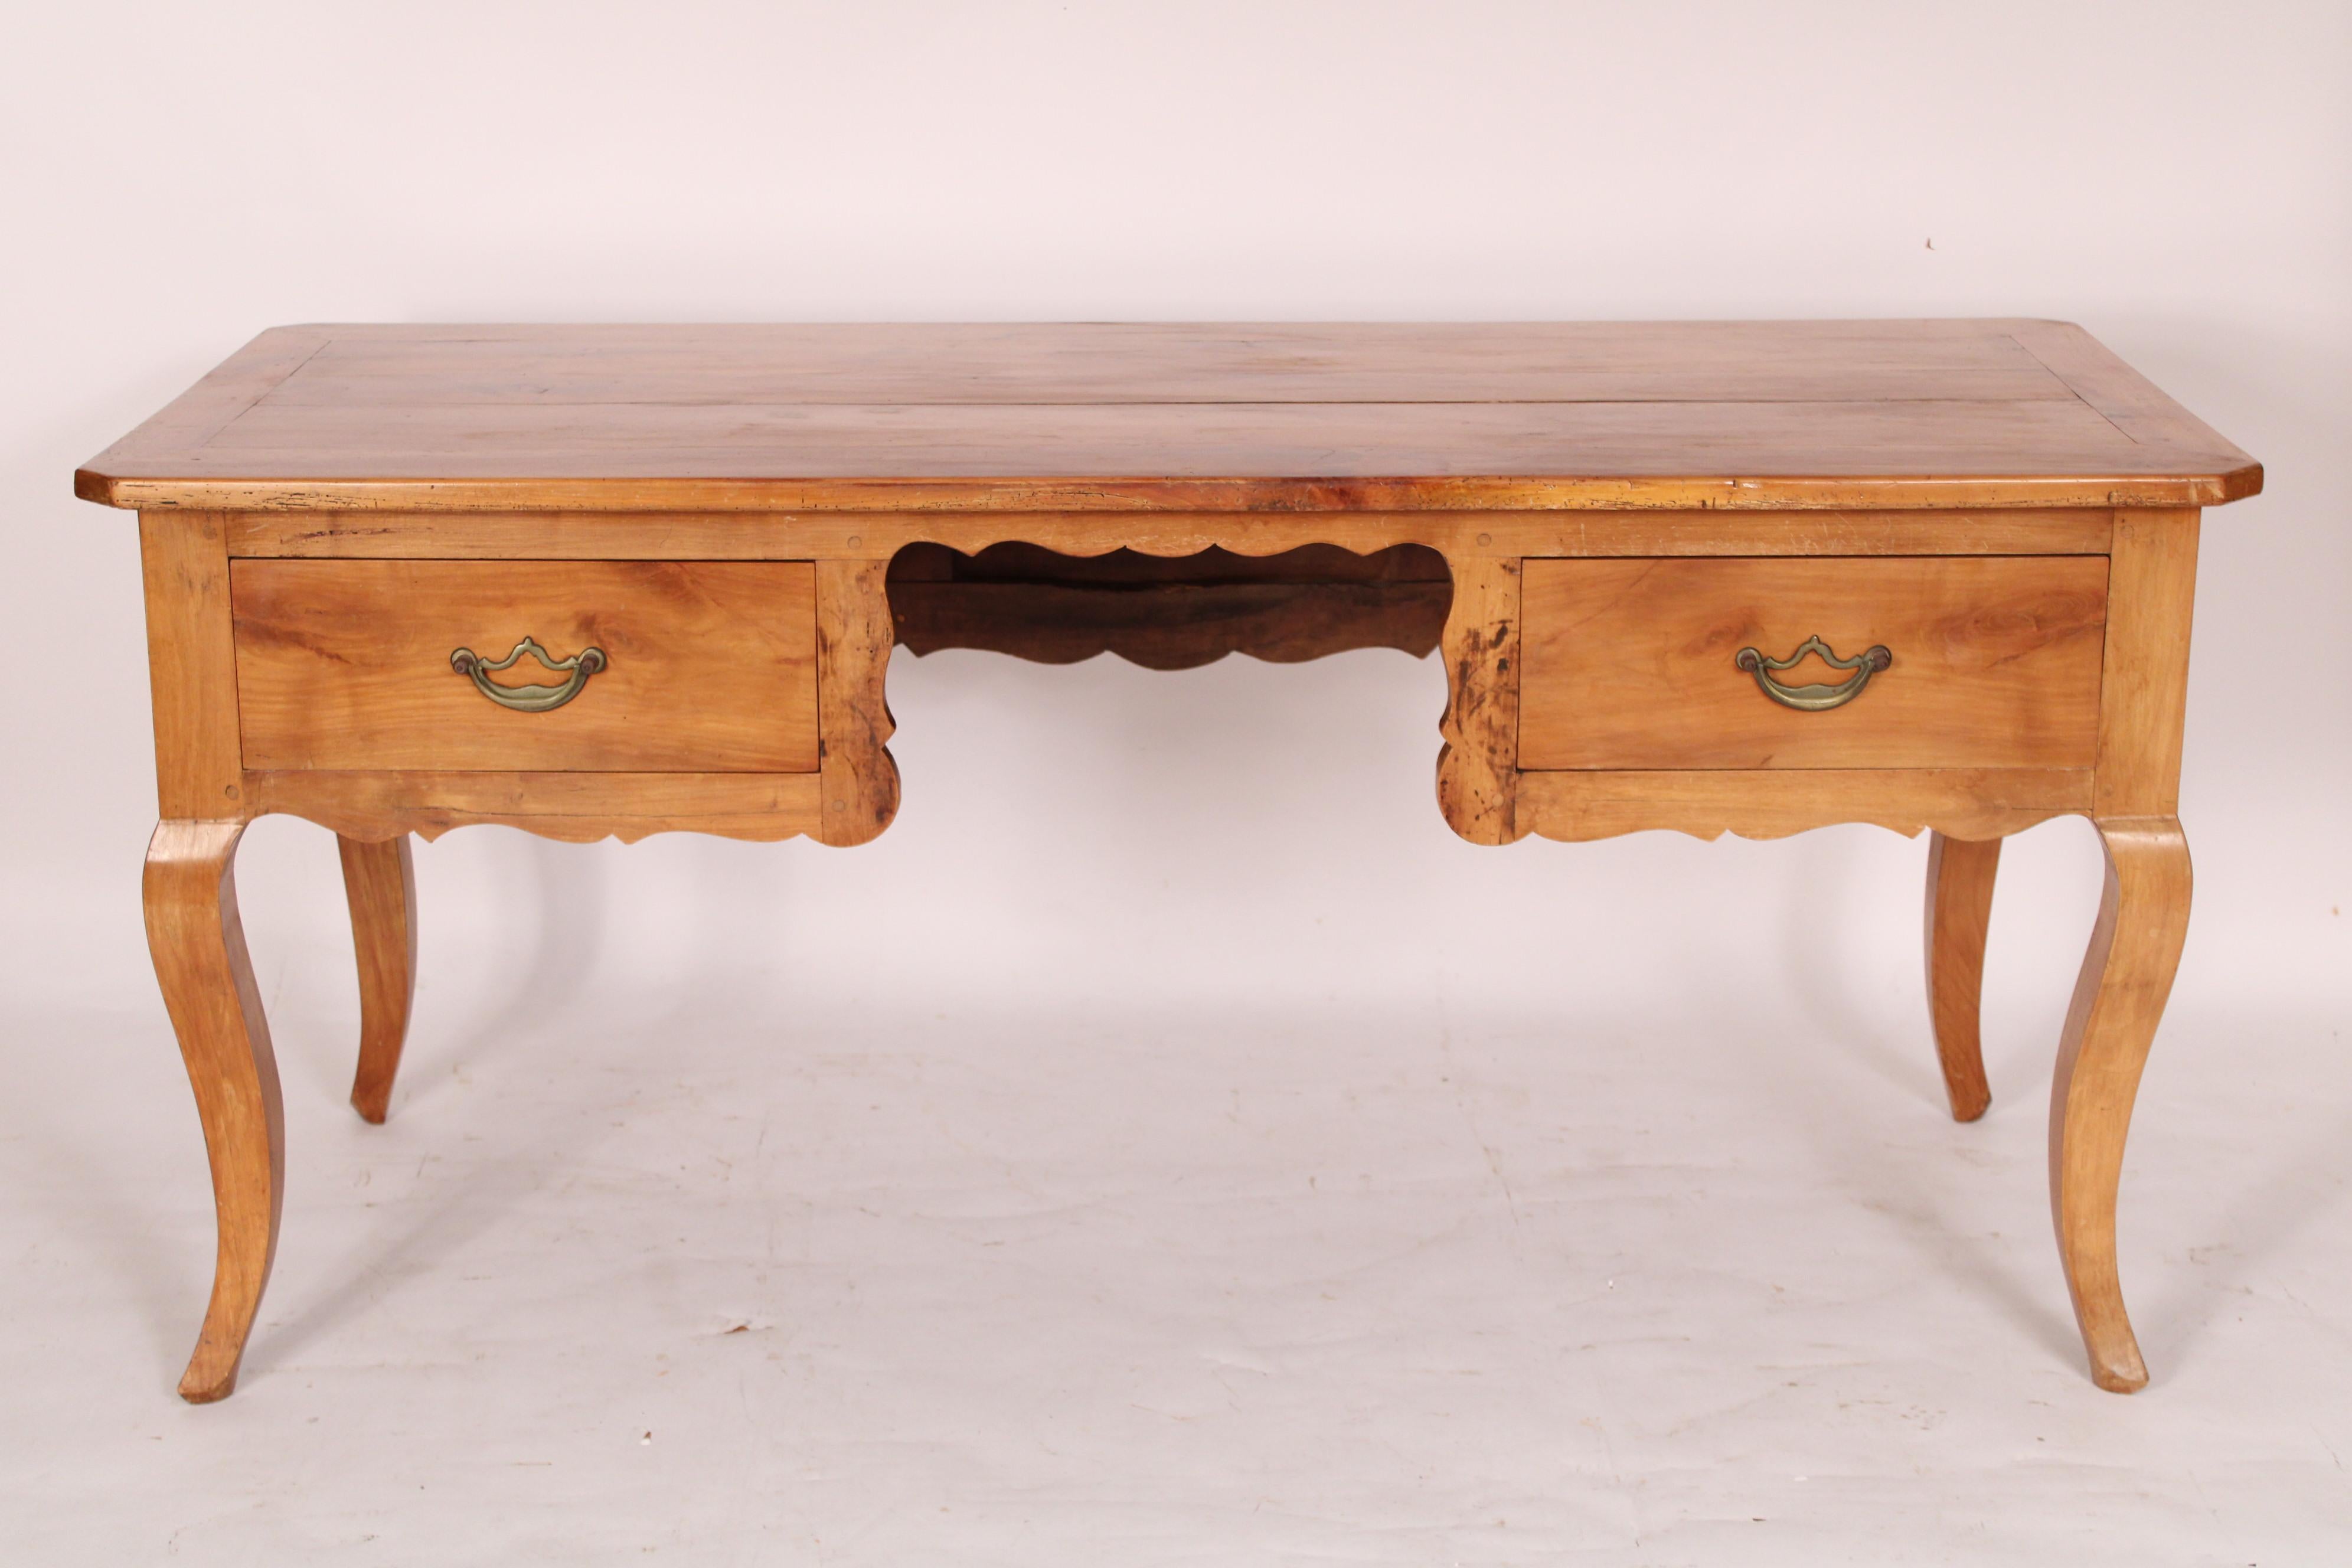 Antique Louis XV style fruit wood writing table / desk, 19th century with alterations. With a rectangular top with slightly beveled edges and canted corners, two frieze drawers with brass hardware, resting on cabriole legs. Mortise, tenon and peg